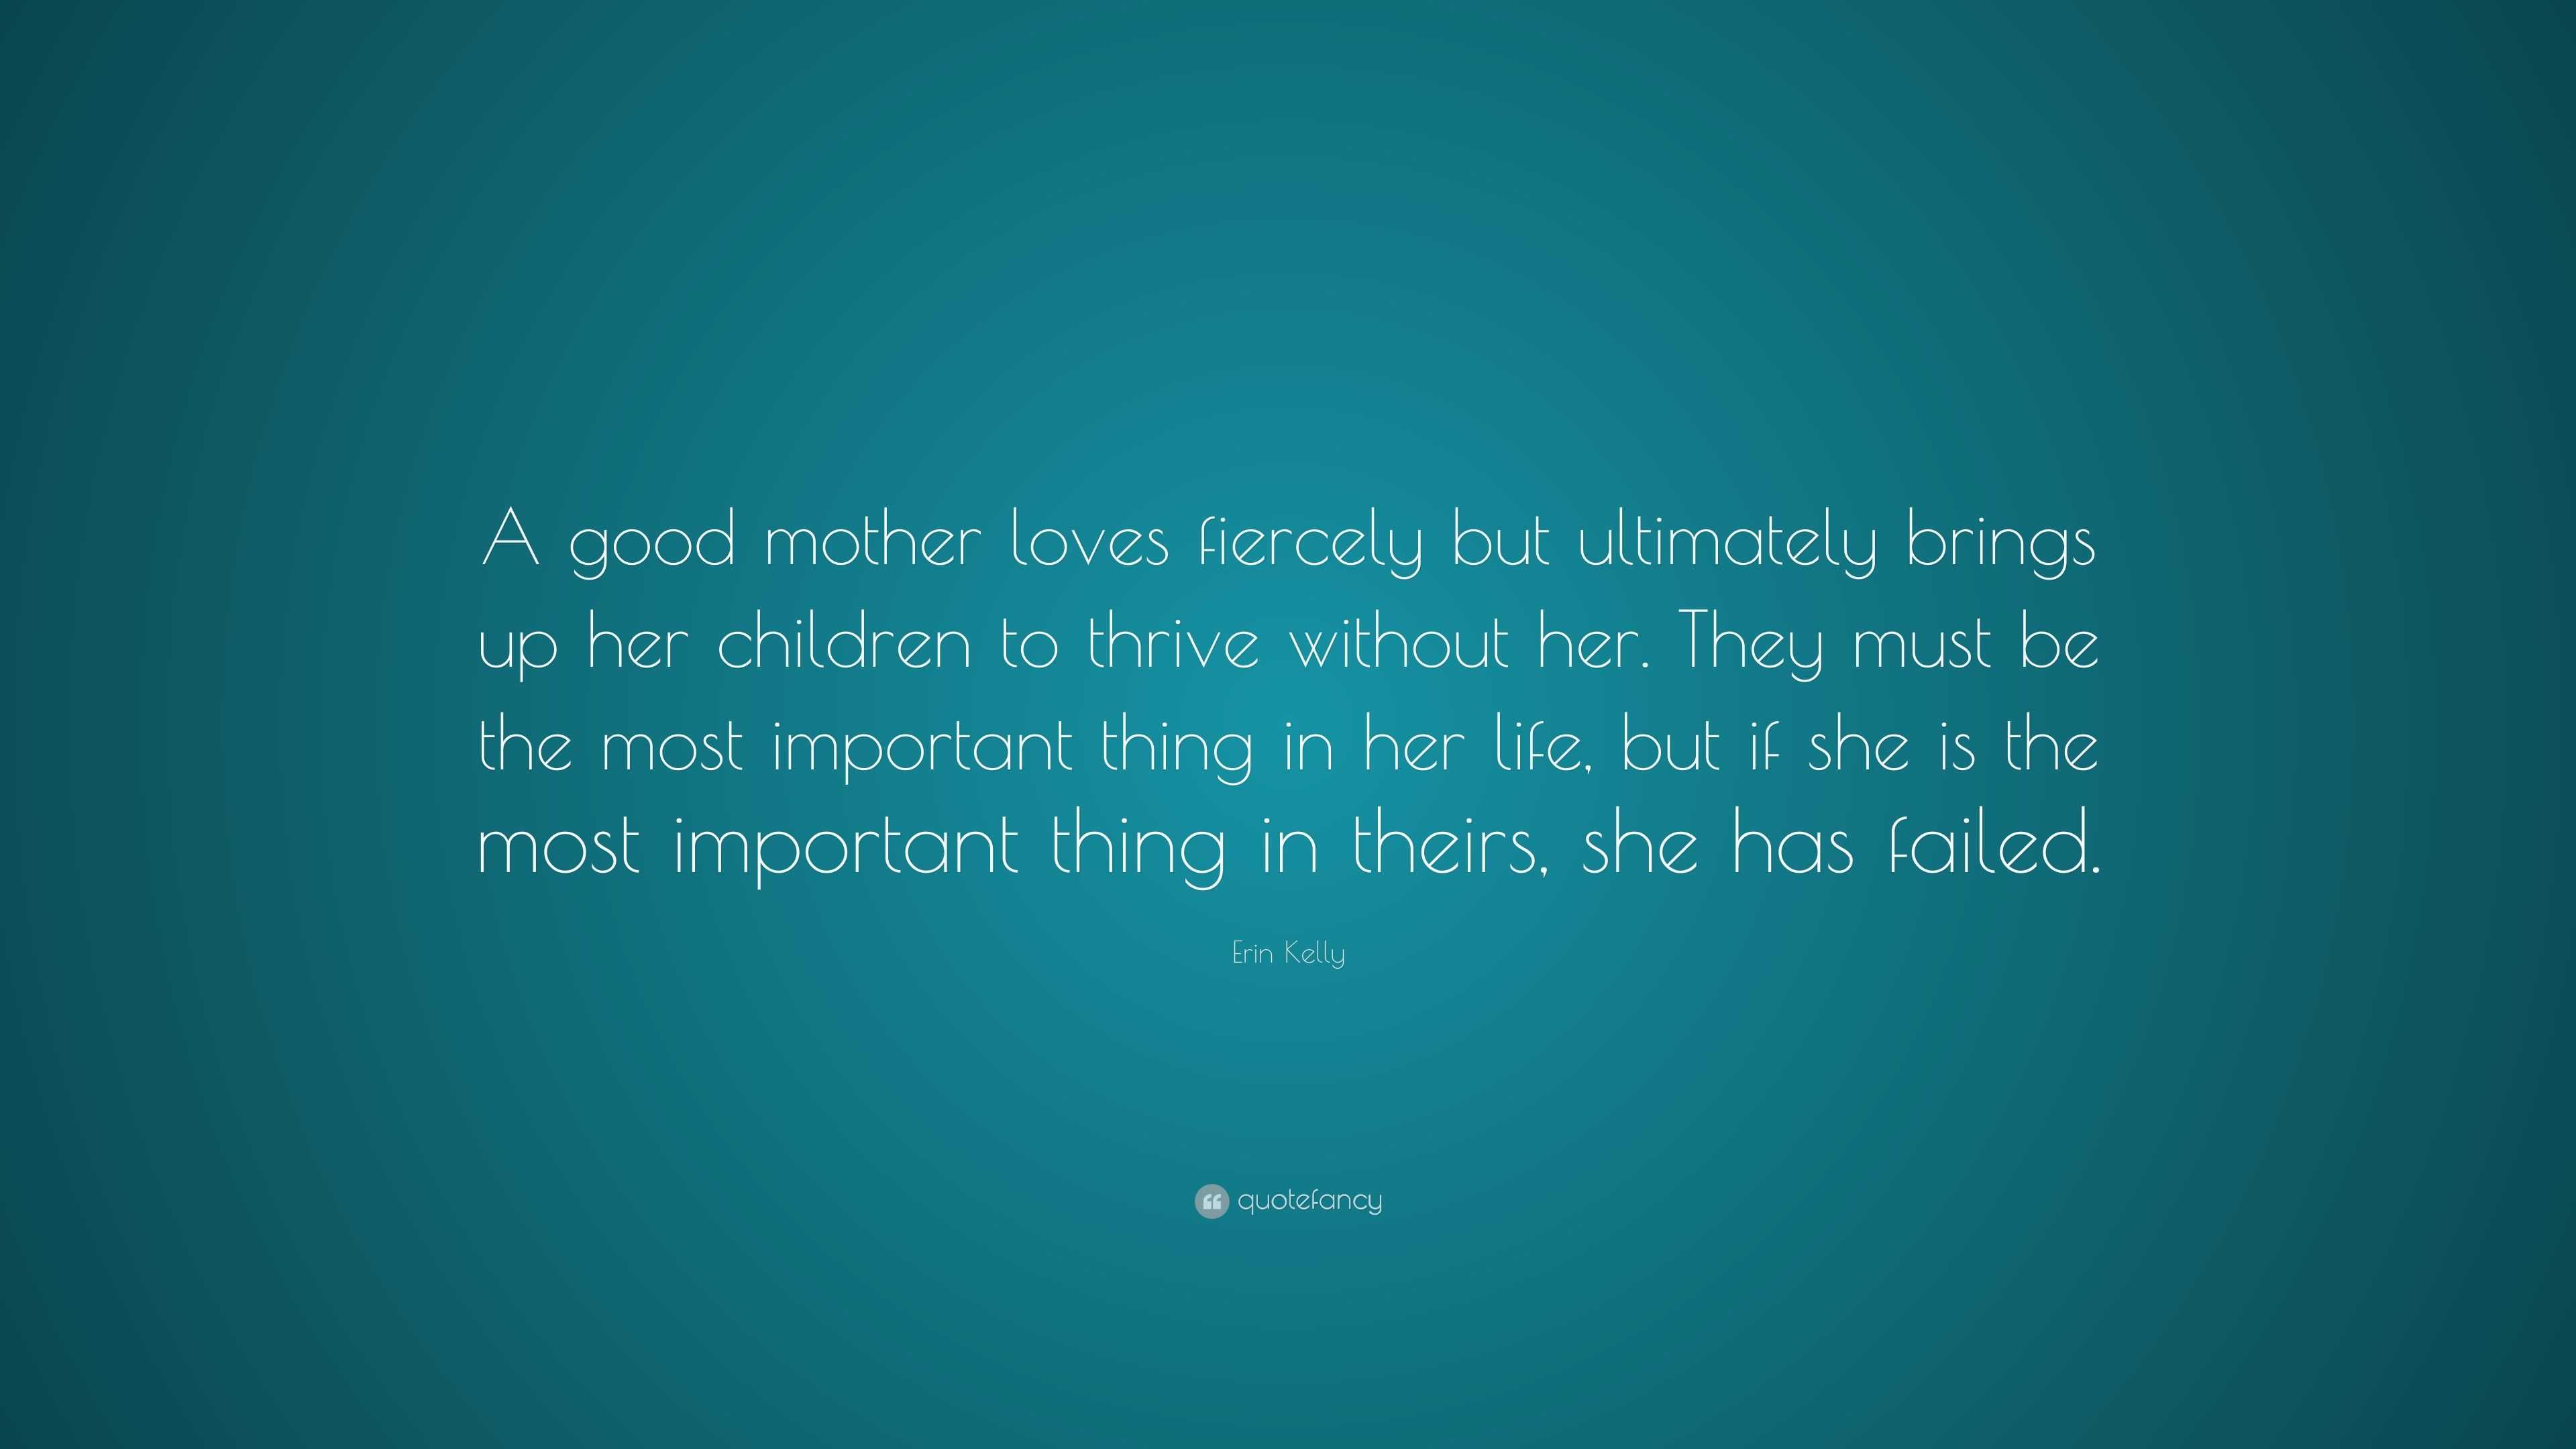 Erin Kelly Quote “A good mother loves fiercely but ultimately brings up her children